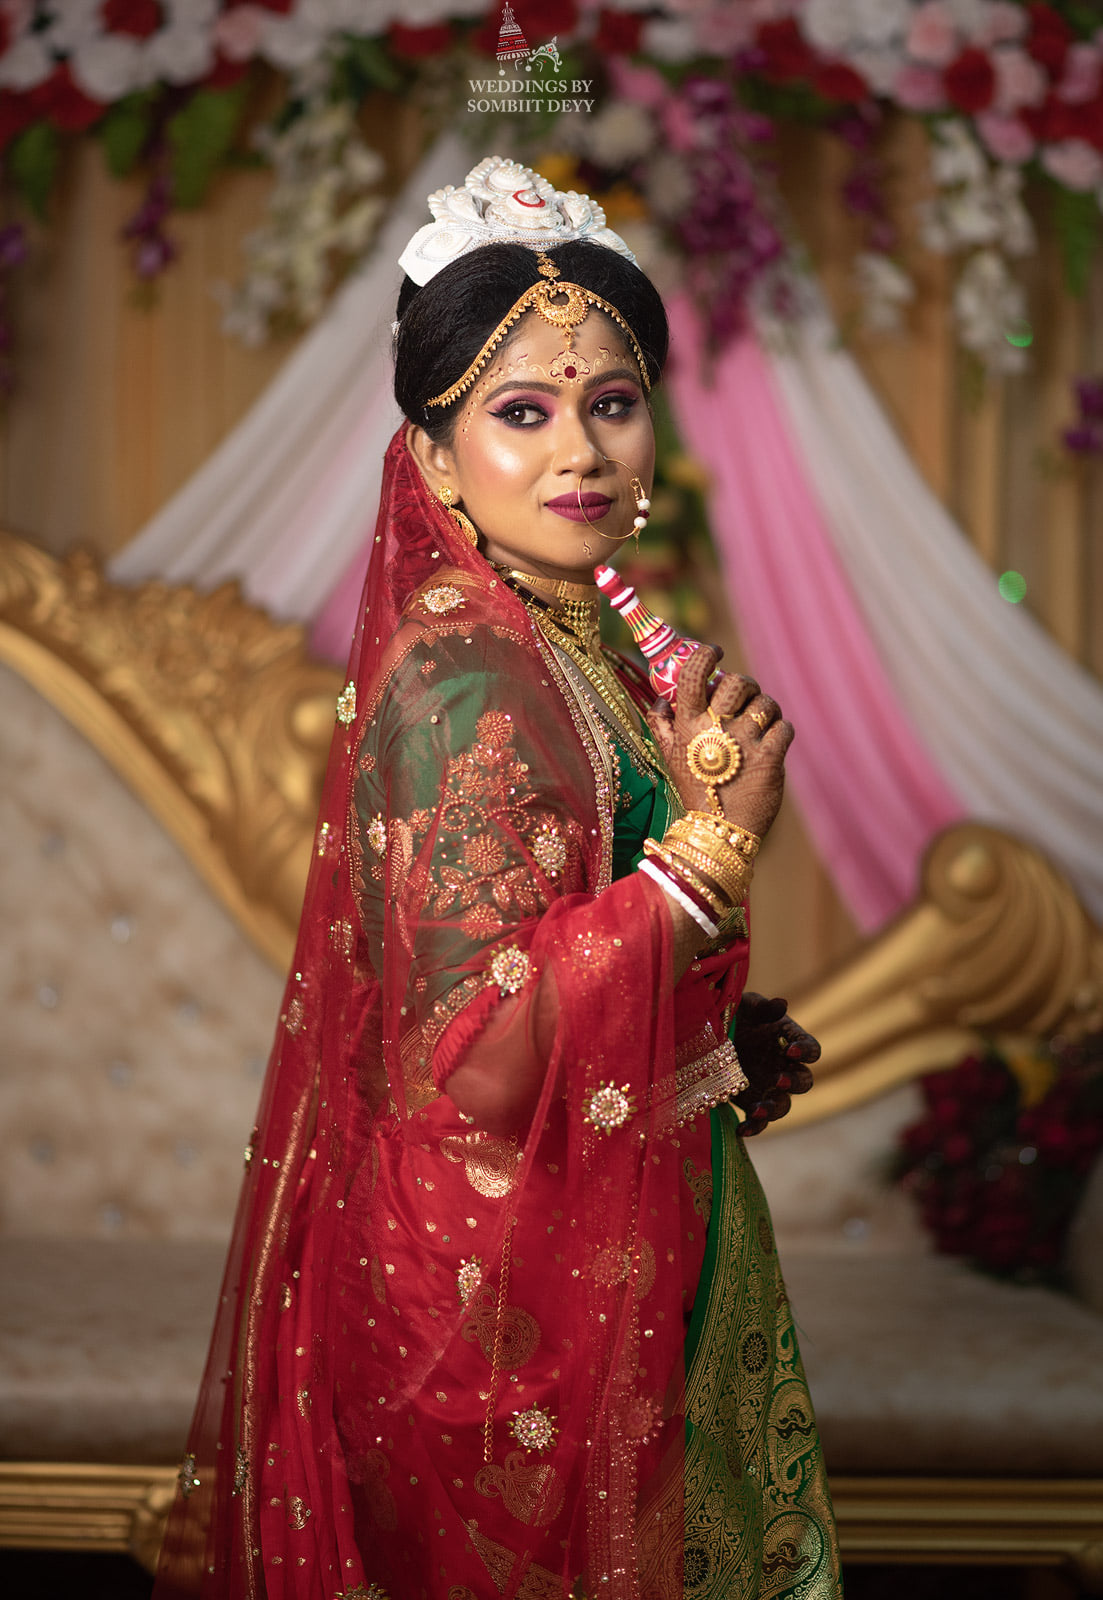 Here Are Some Dazzling Indian Bridal Photoshoot Poses for Every Brides  Wedding Album